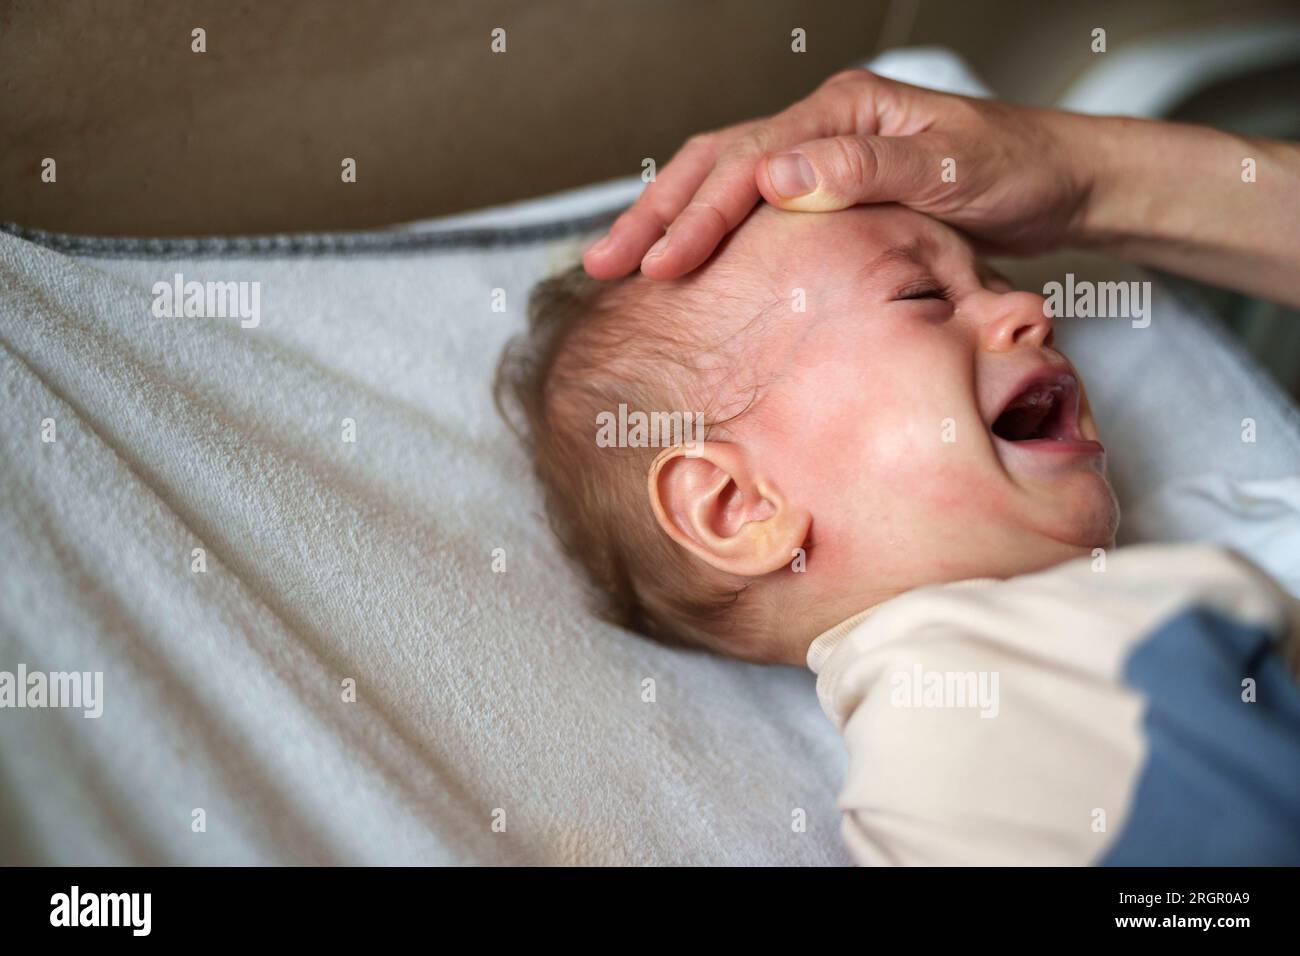 Parent trying to calm an agitated baby crying in pain Stock Photo